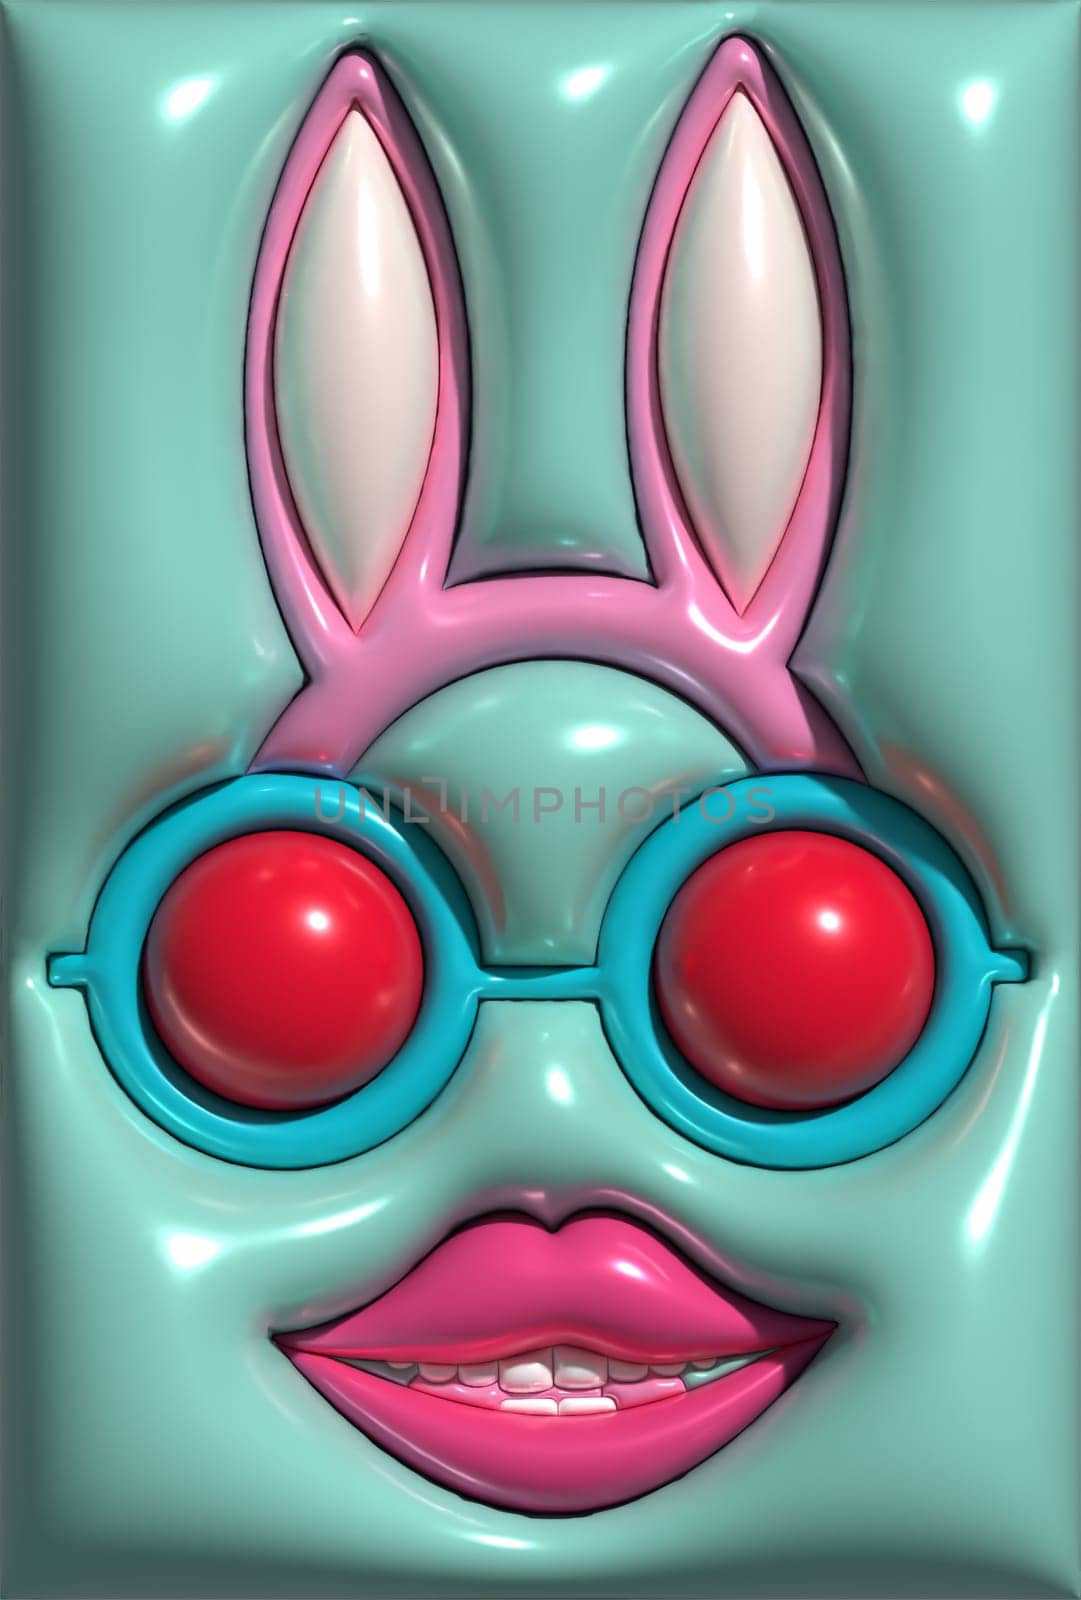 Character wearing glasses and a headband with ears and red lips, 3D rendering. illustration